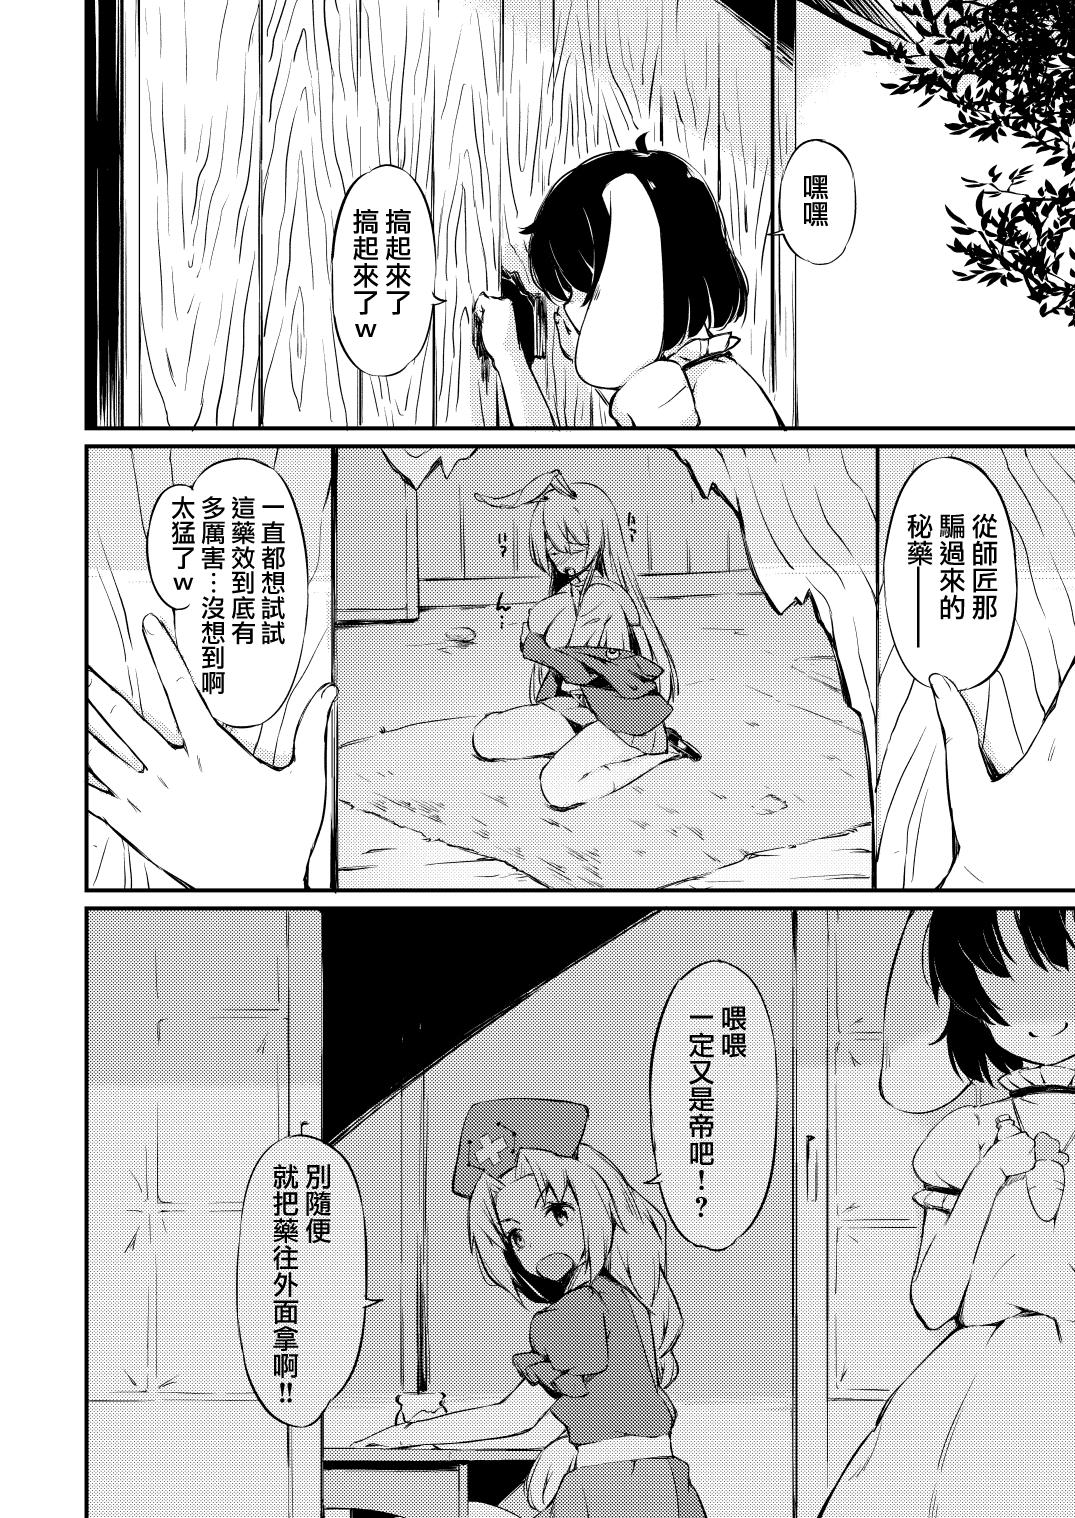 Clothed Udon-chan Sei Ippai - Touhou project Livecams - Page 5